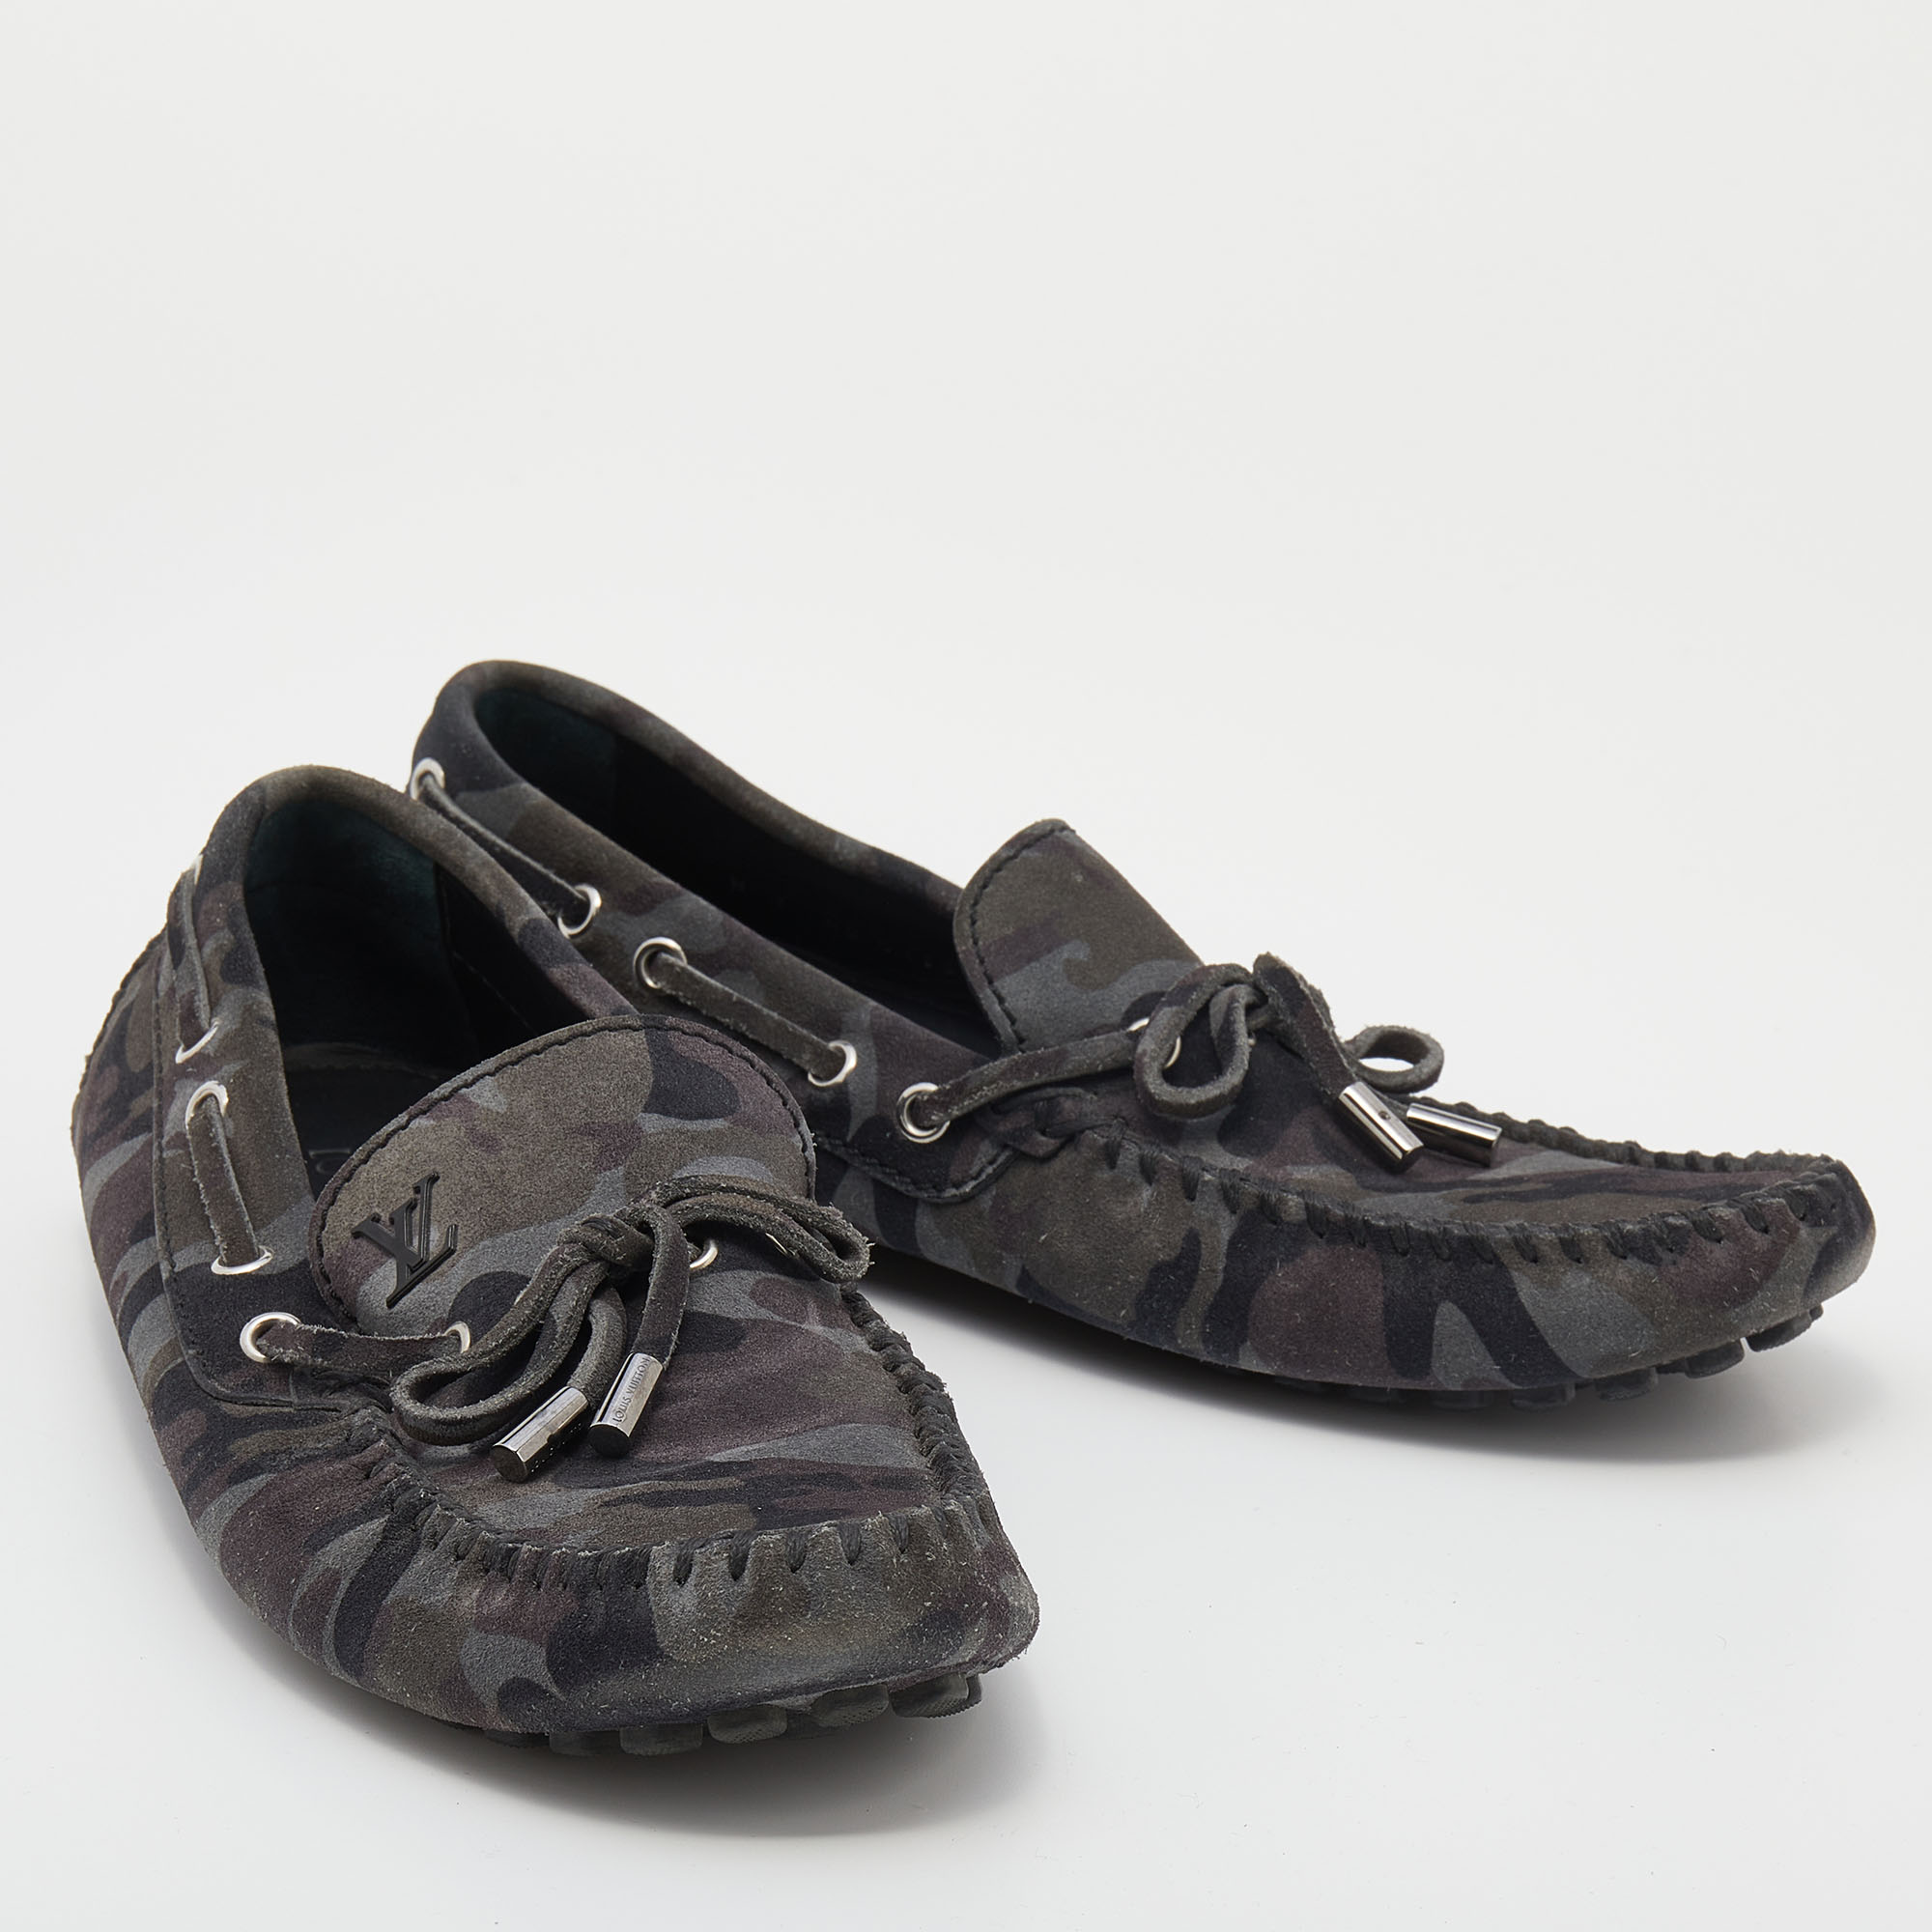 Louis Vuitton Grey Camouflage Print Suede Arizona Slip On Loafers Size 41